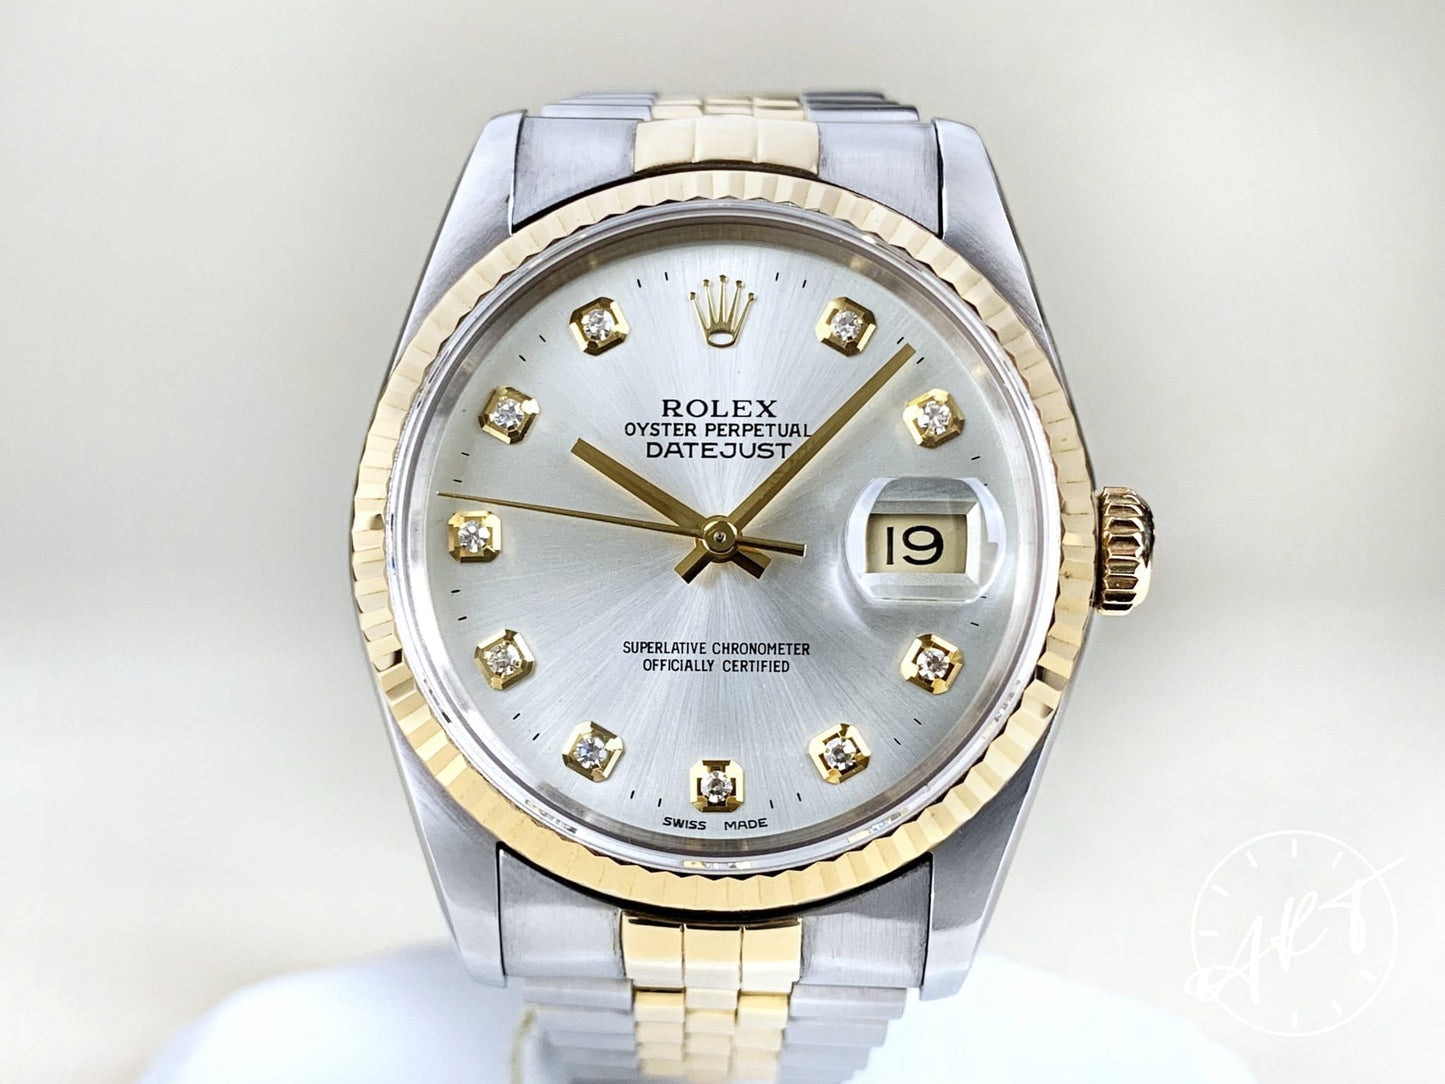 1991 Rolex Oyster Perpetual DateJust Silver Diamond Dial 18K Gold & SS Watch 16233 w/Box